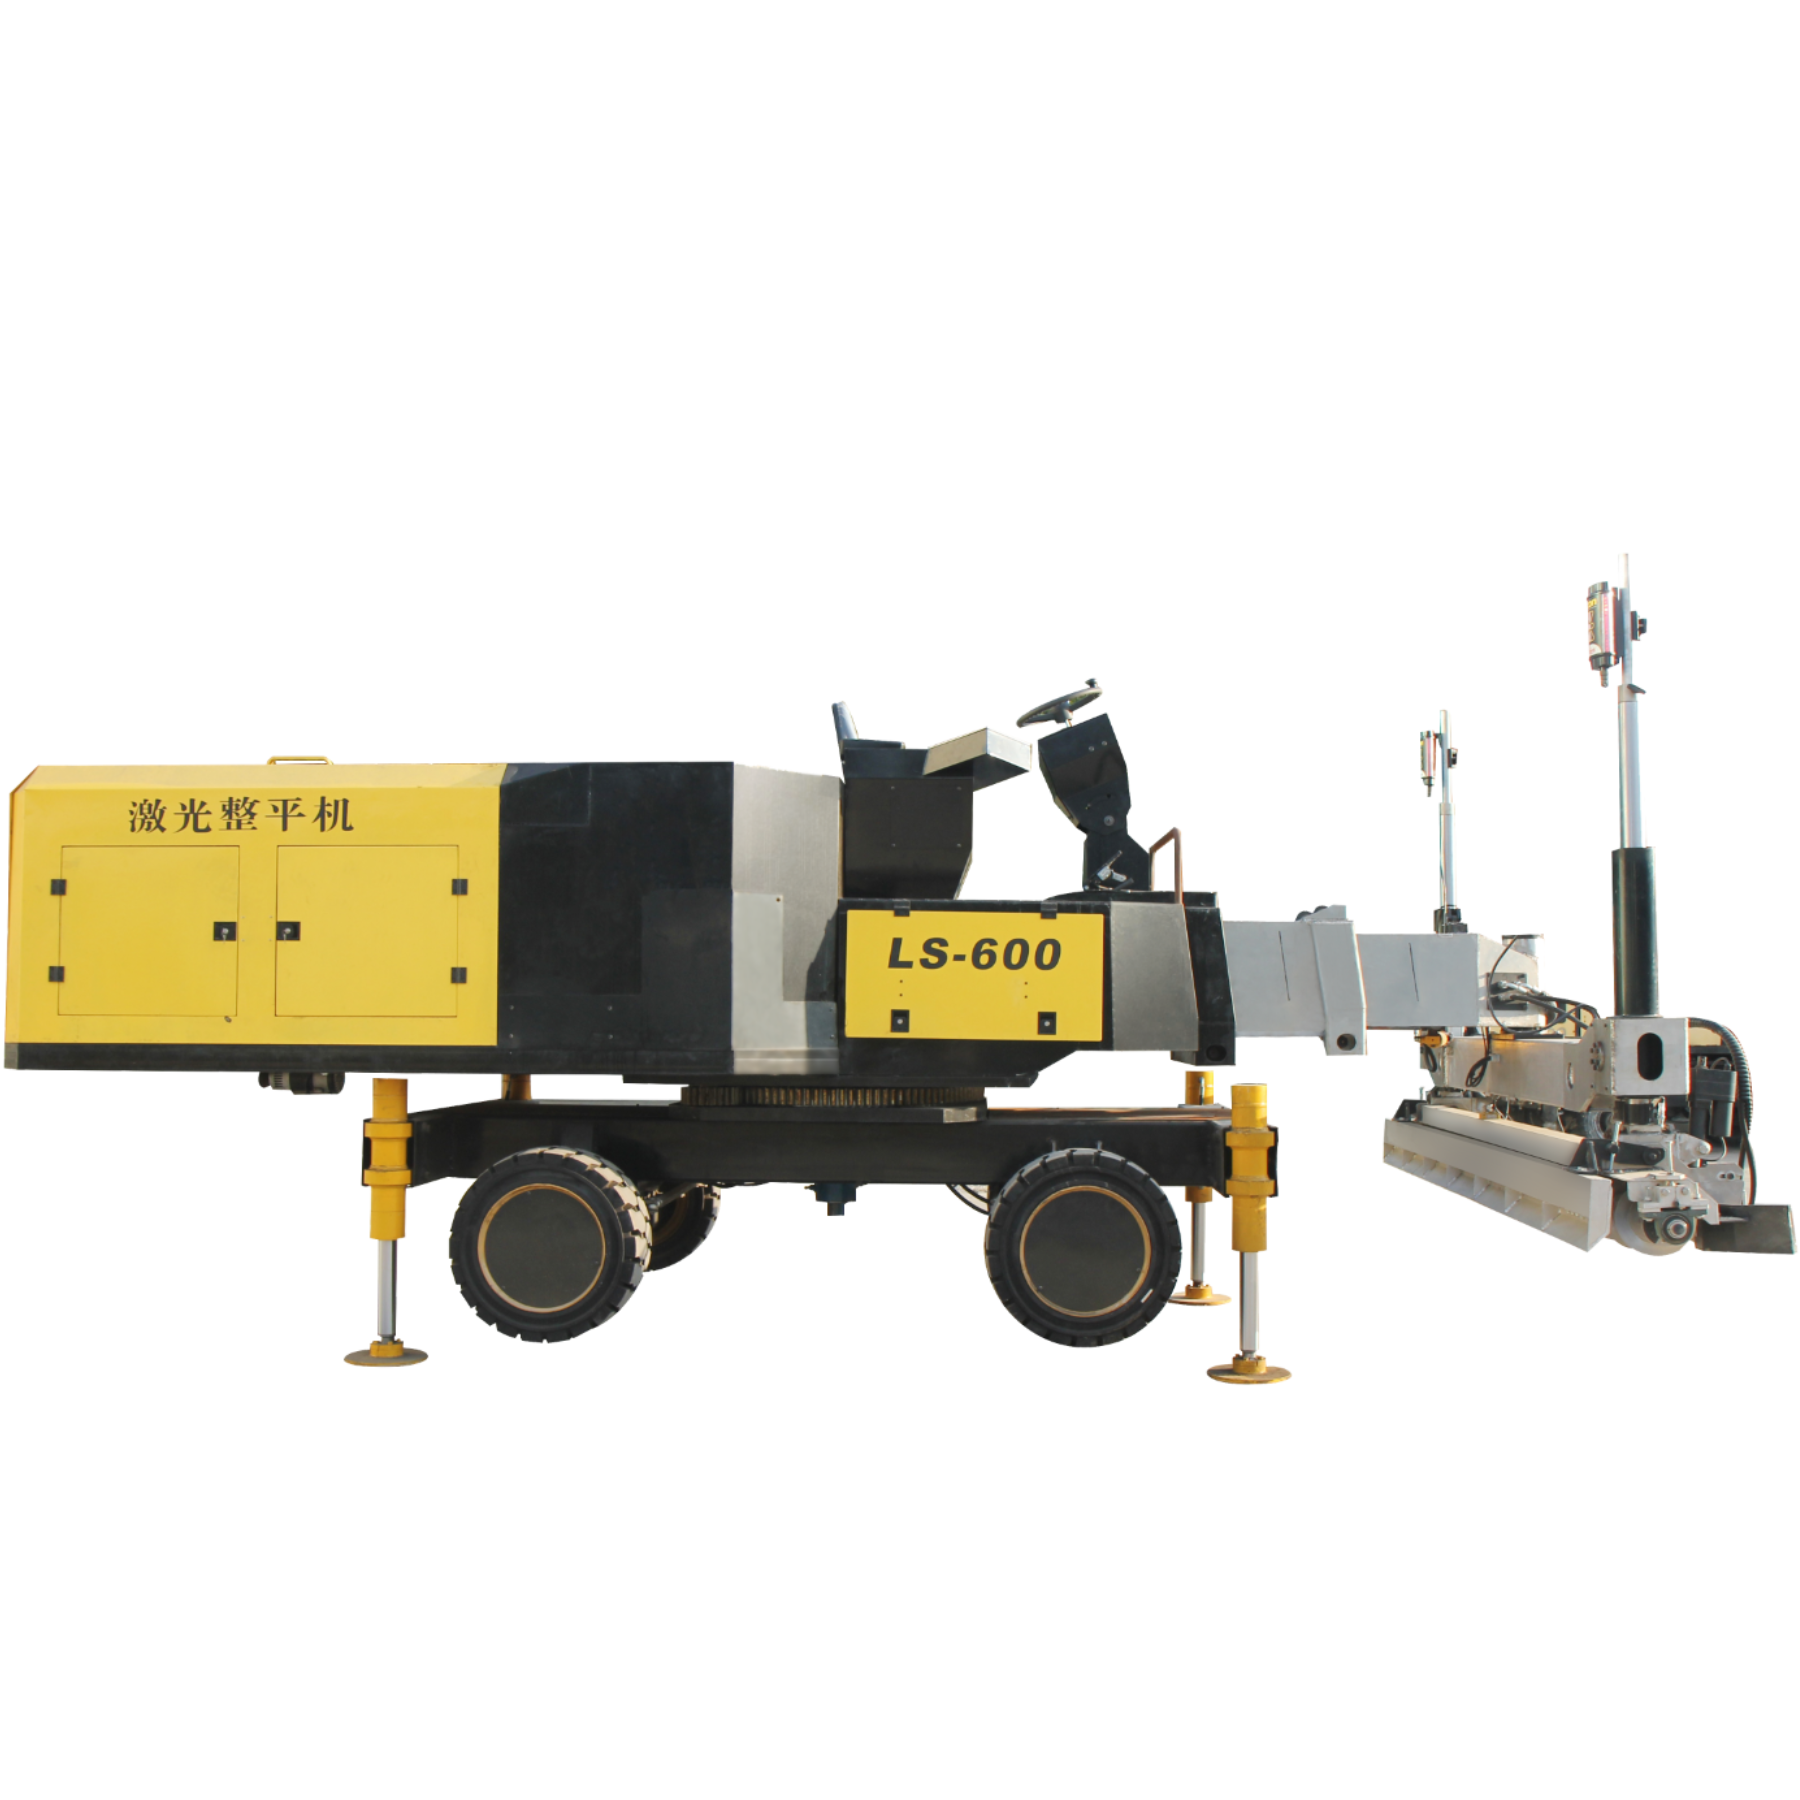 LS-600 Large Telescopic boom Concrete Laser Screed Featured Image